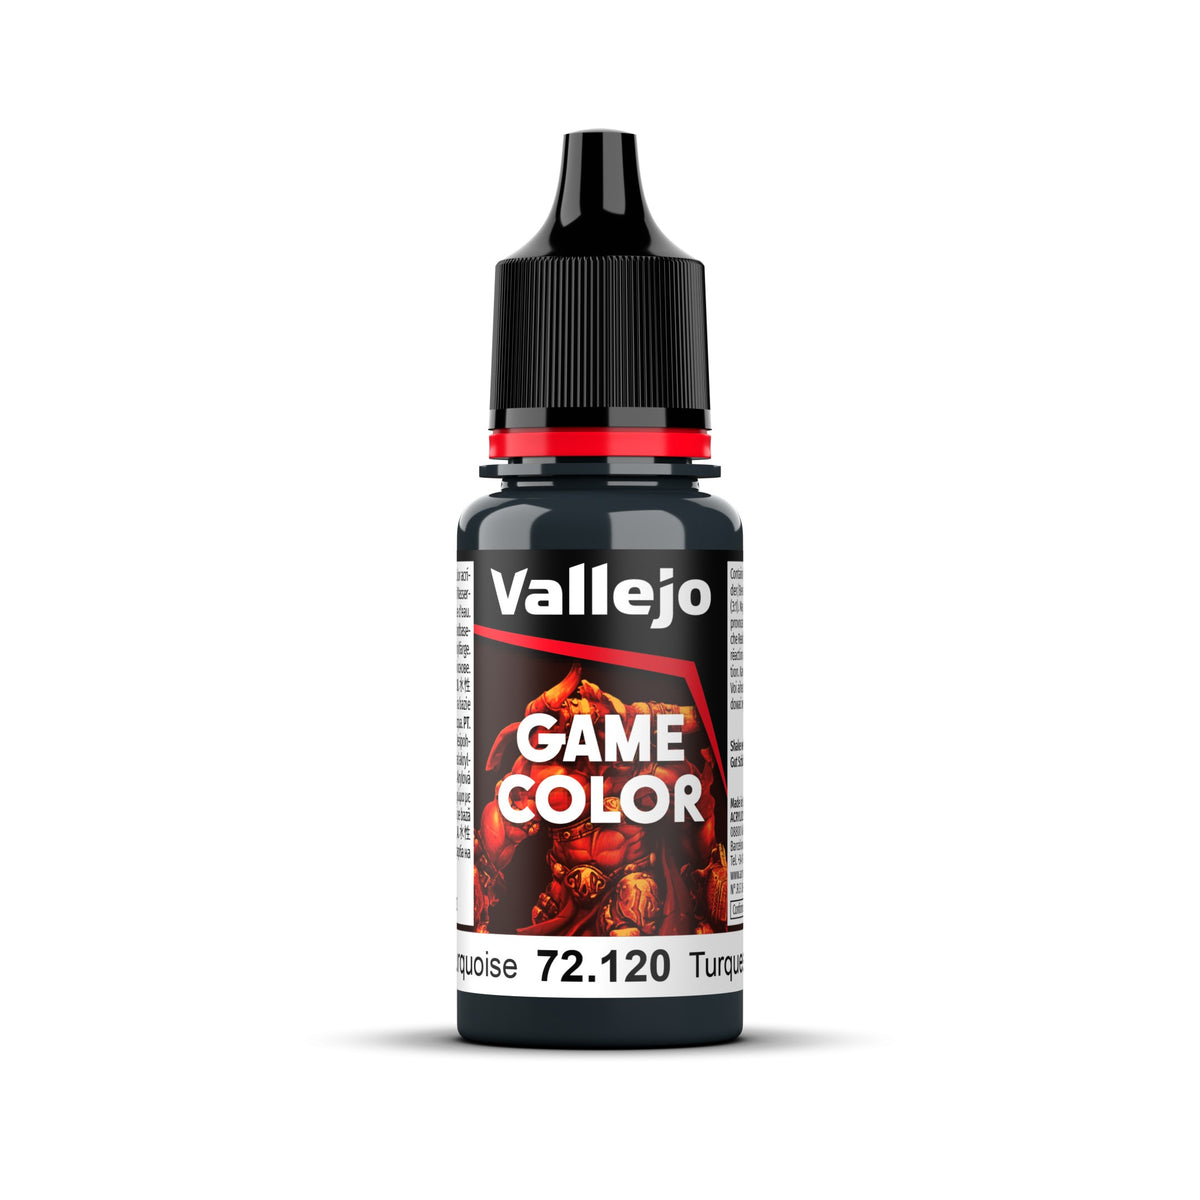 Vallejo Game Colour Abyssal Turquoise 18ml